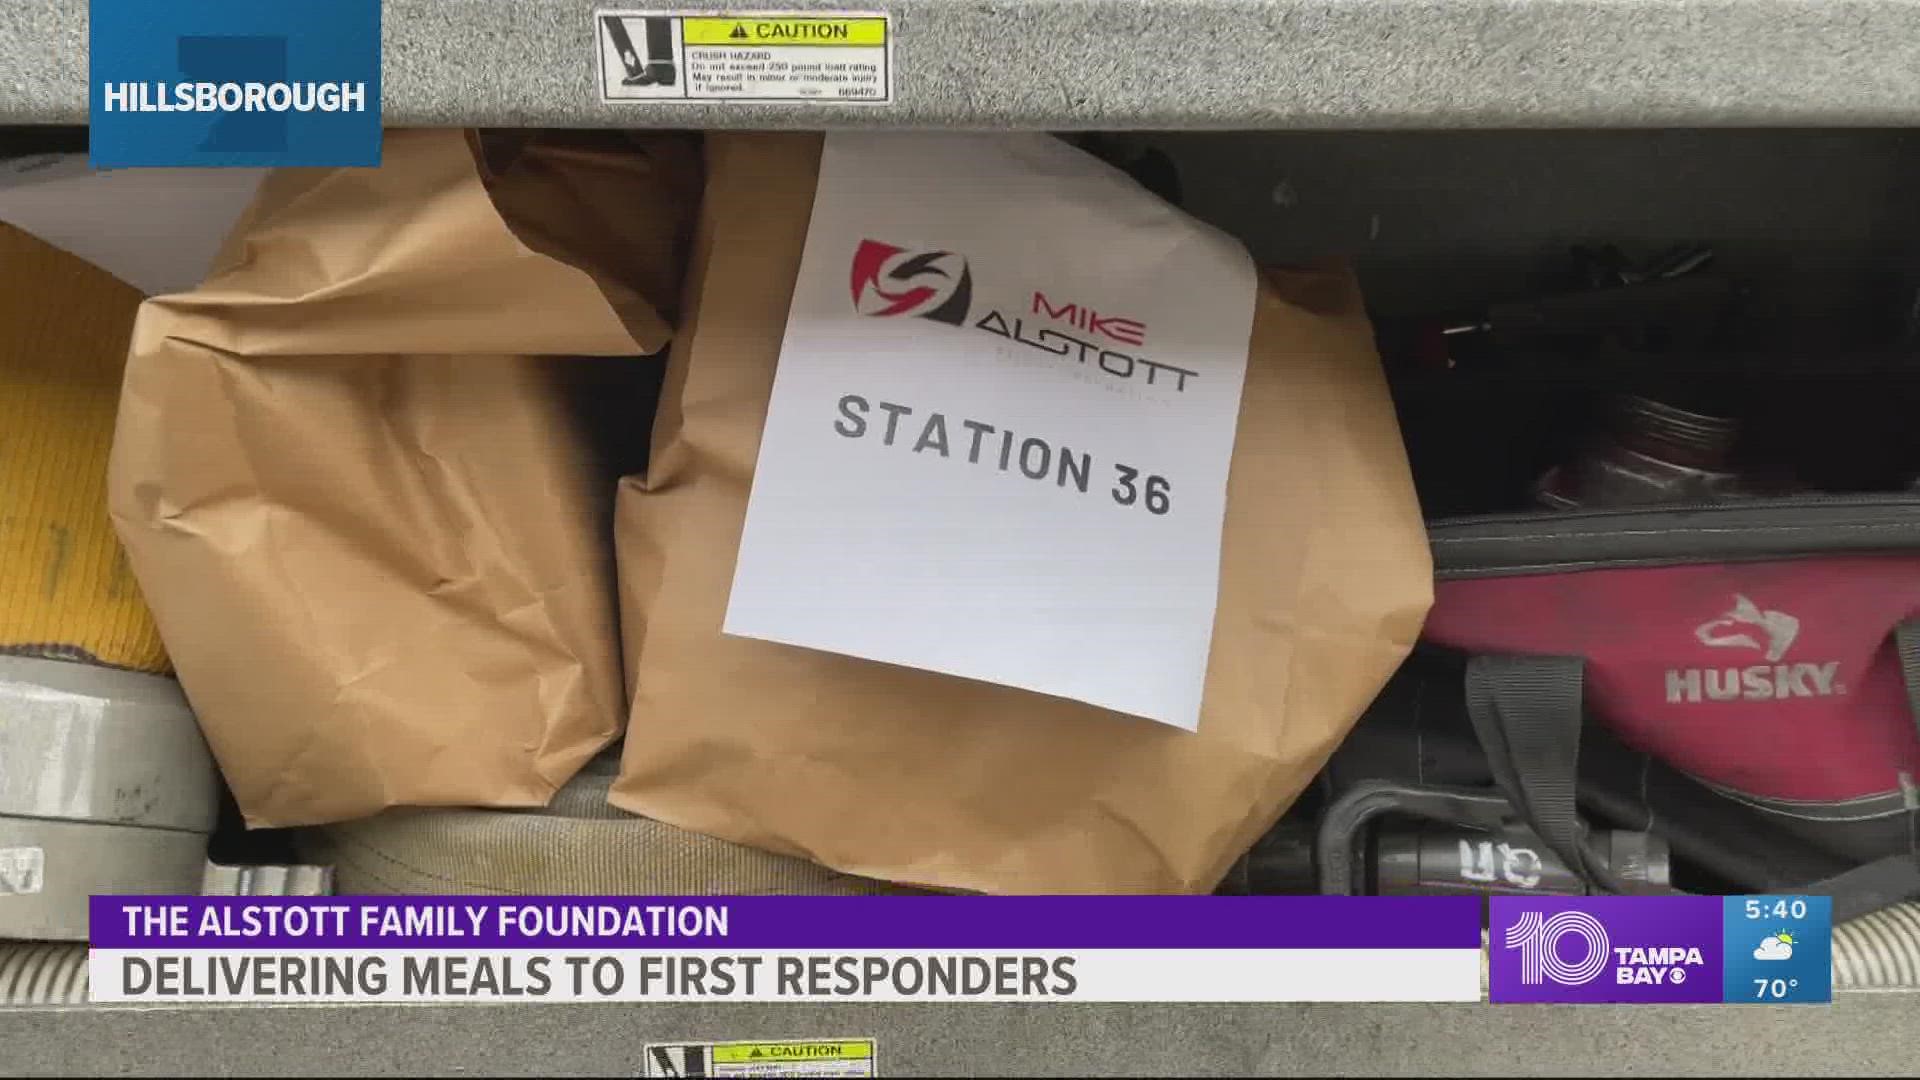 A few local organizations are teaming up to deliver thanksgiving meals to first responders.